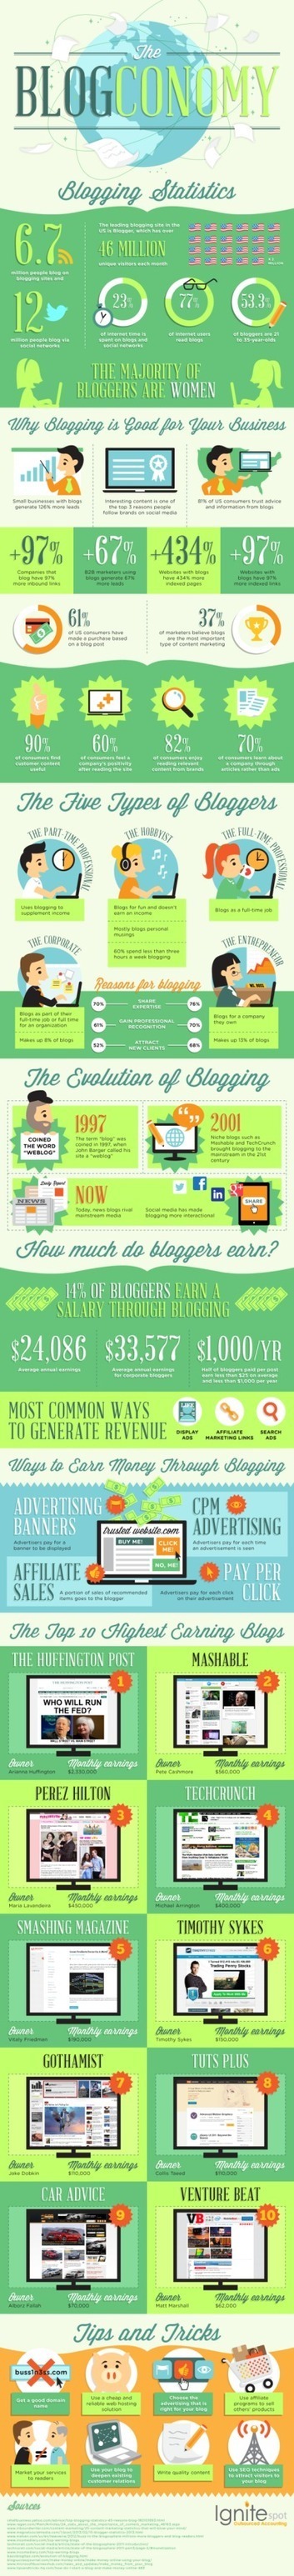 Why Every Business Needs a Blog [Infographic] | MarketingHits | Scoop.it